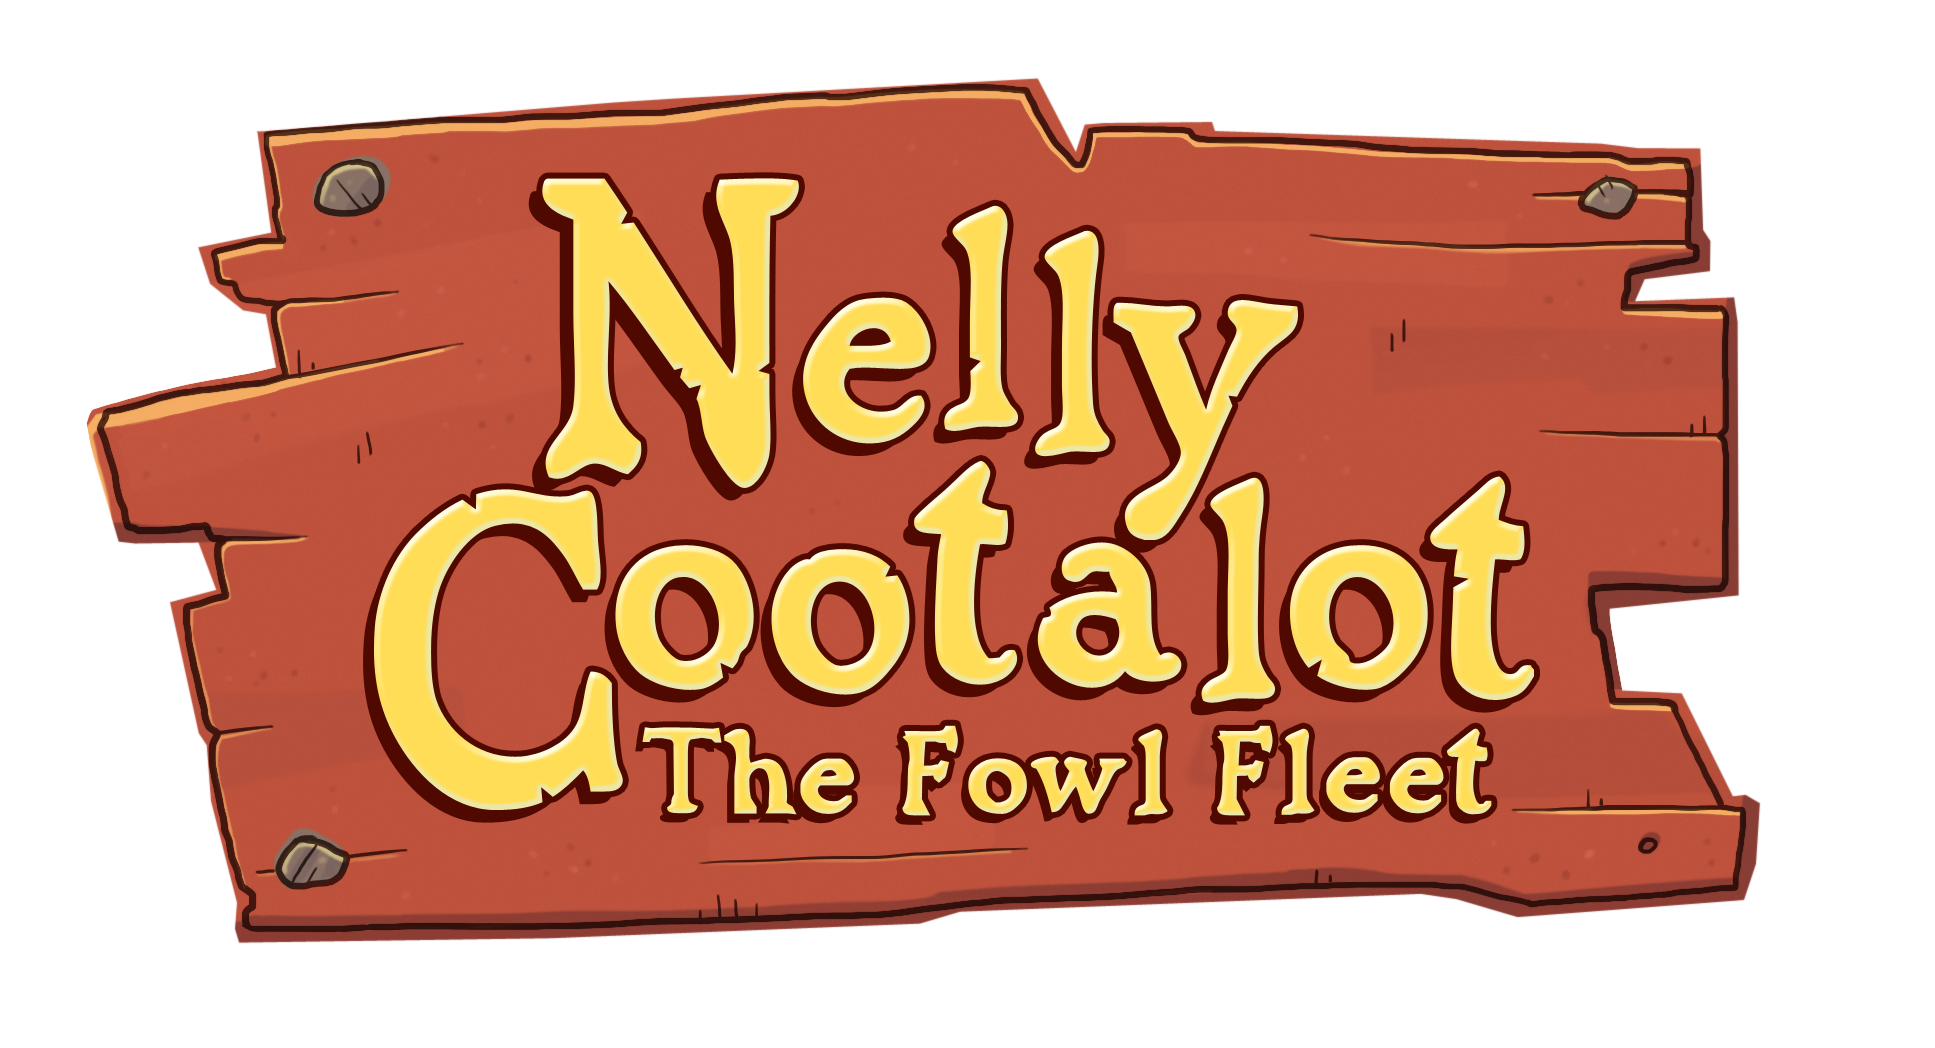 nelly cootalot the fowl fleet review